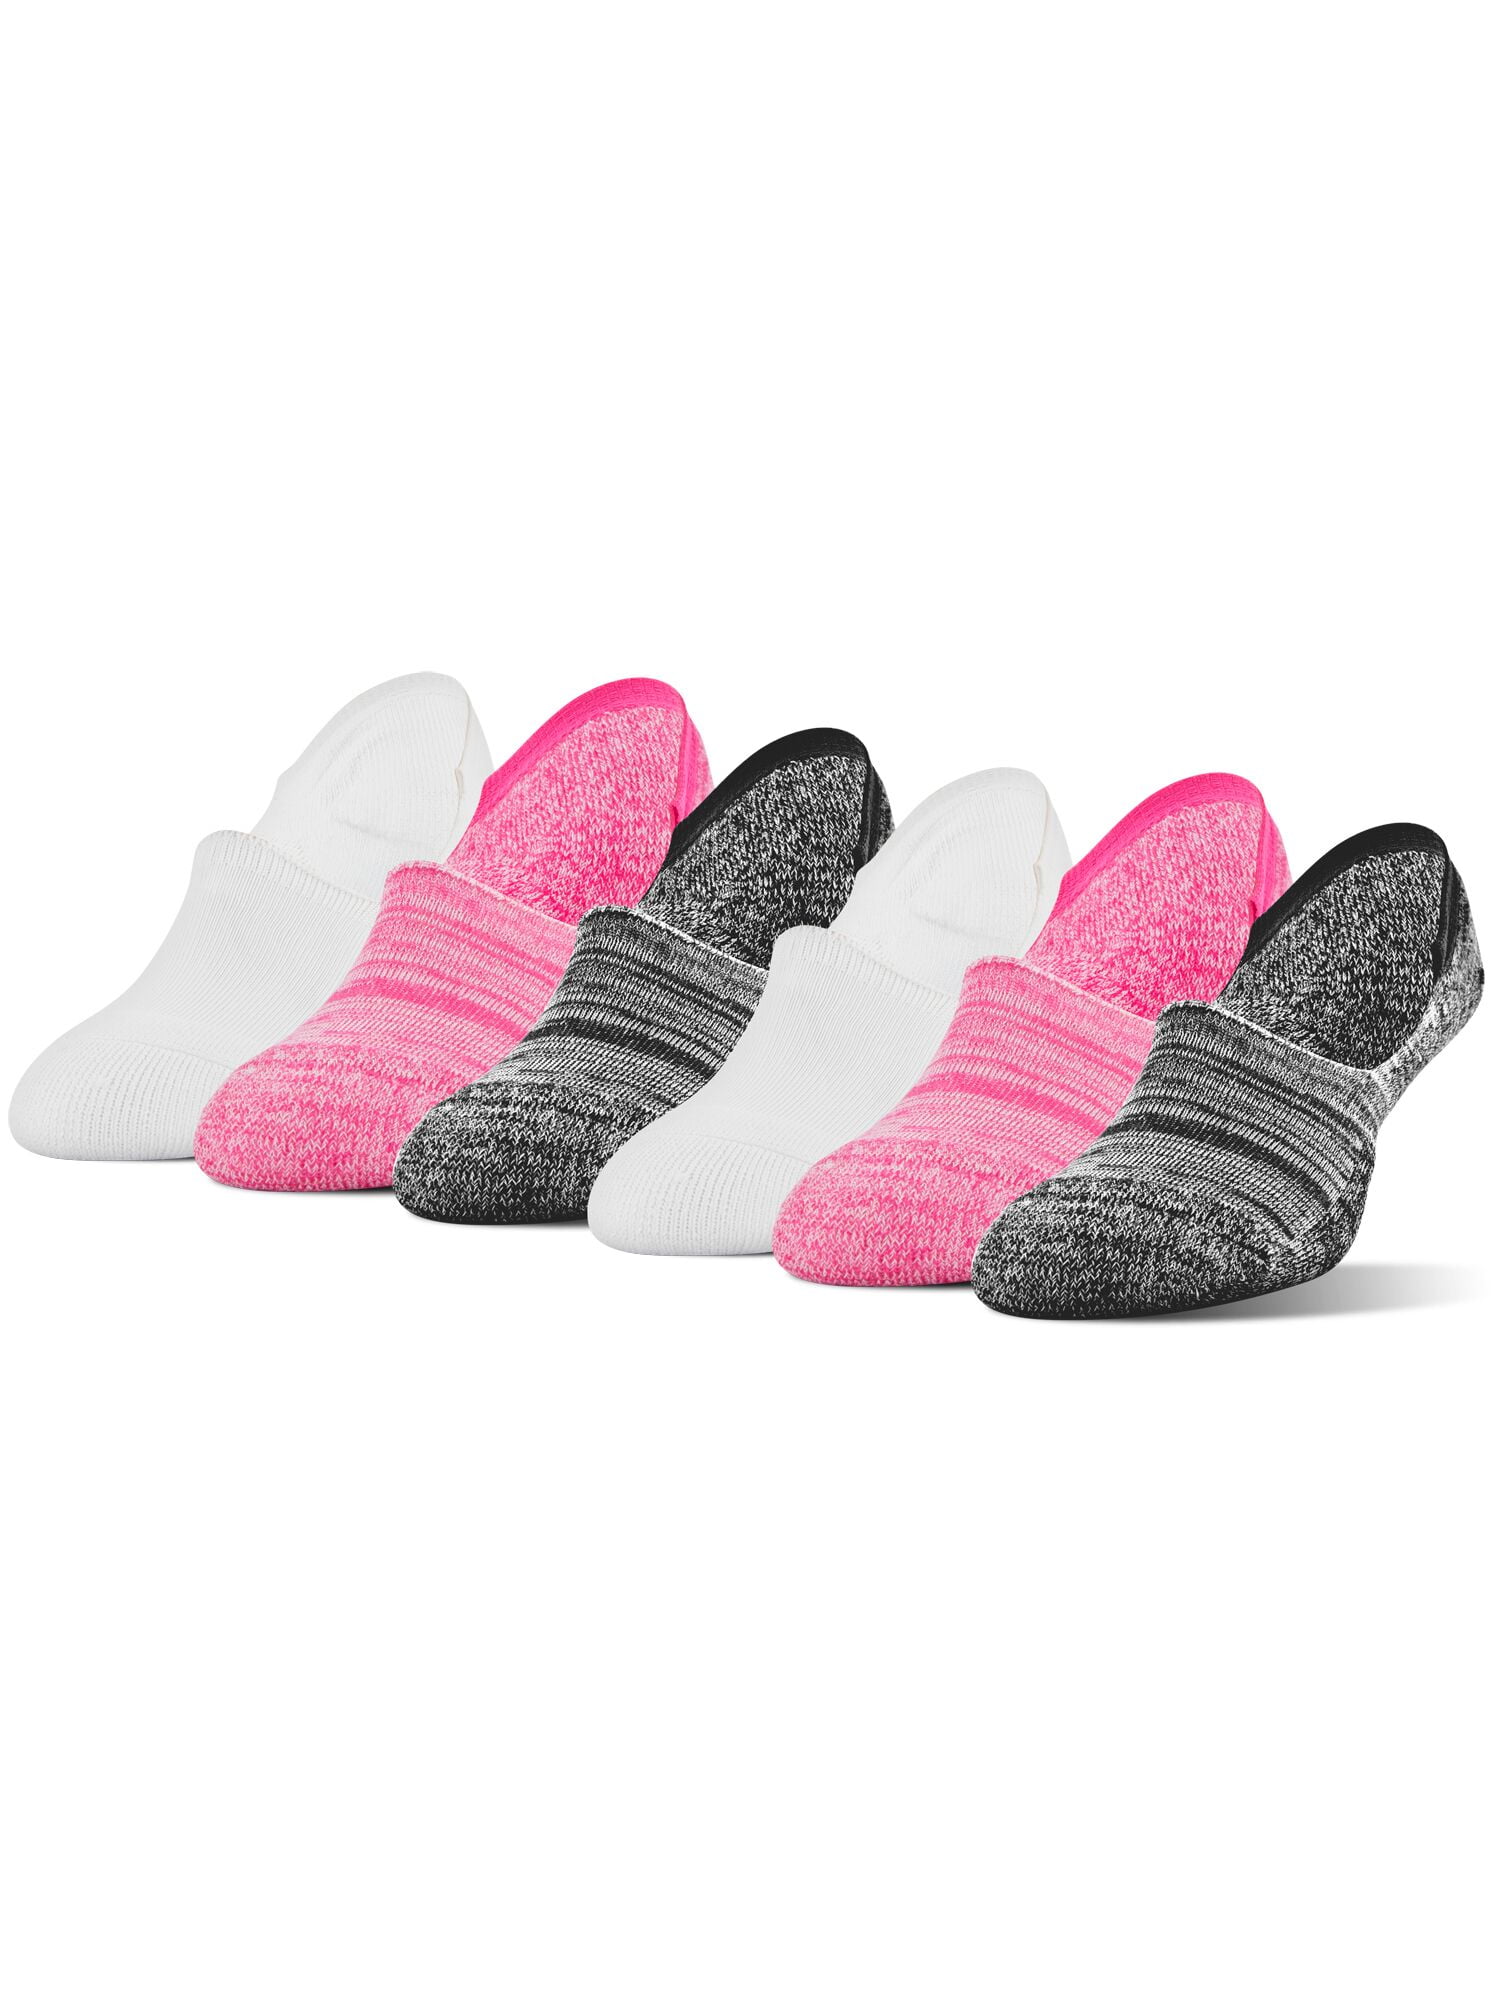 black/white/sport grey/pink/blue PEDS Womens Mid Cut Liners with Y-Heel Shoe Size: 5-10 12 Pairs